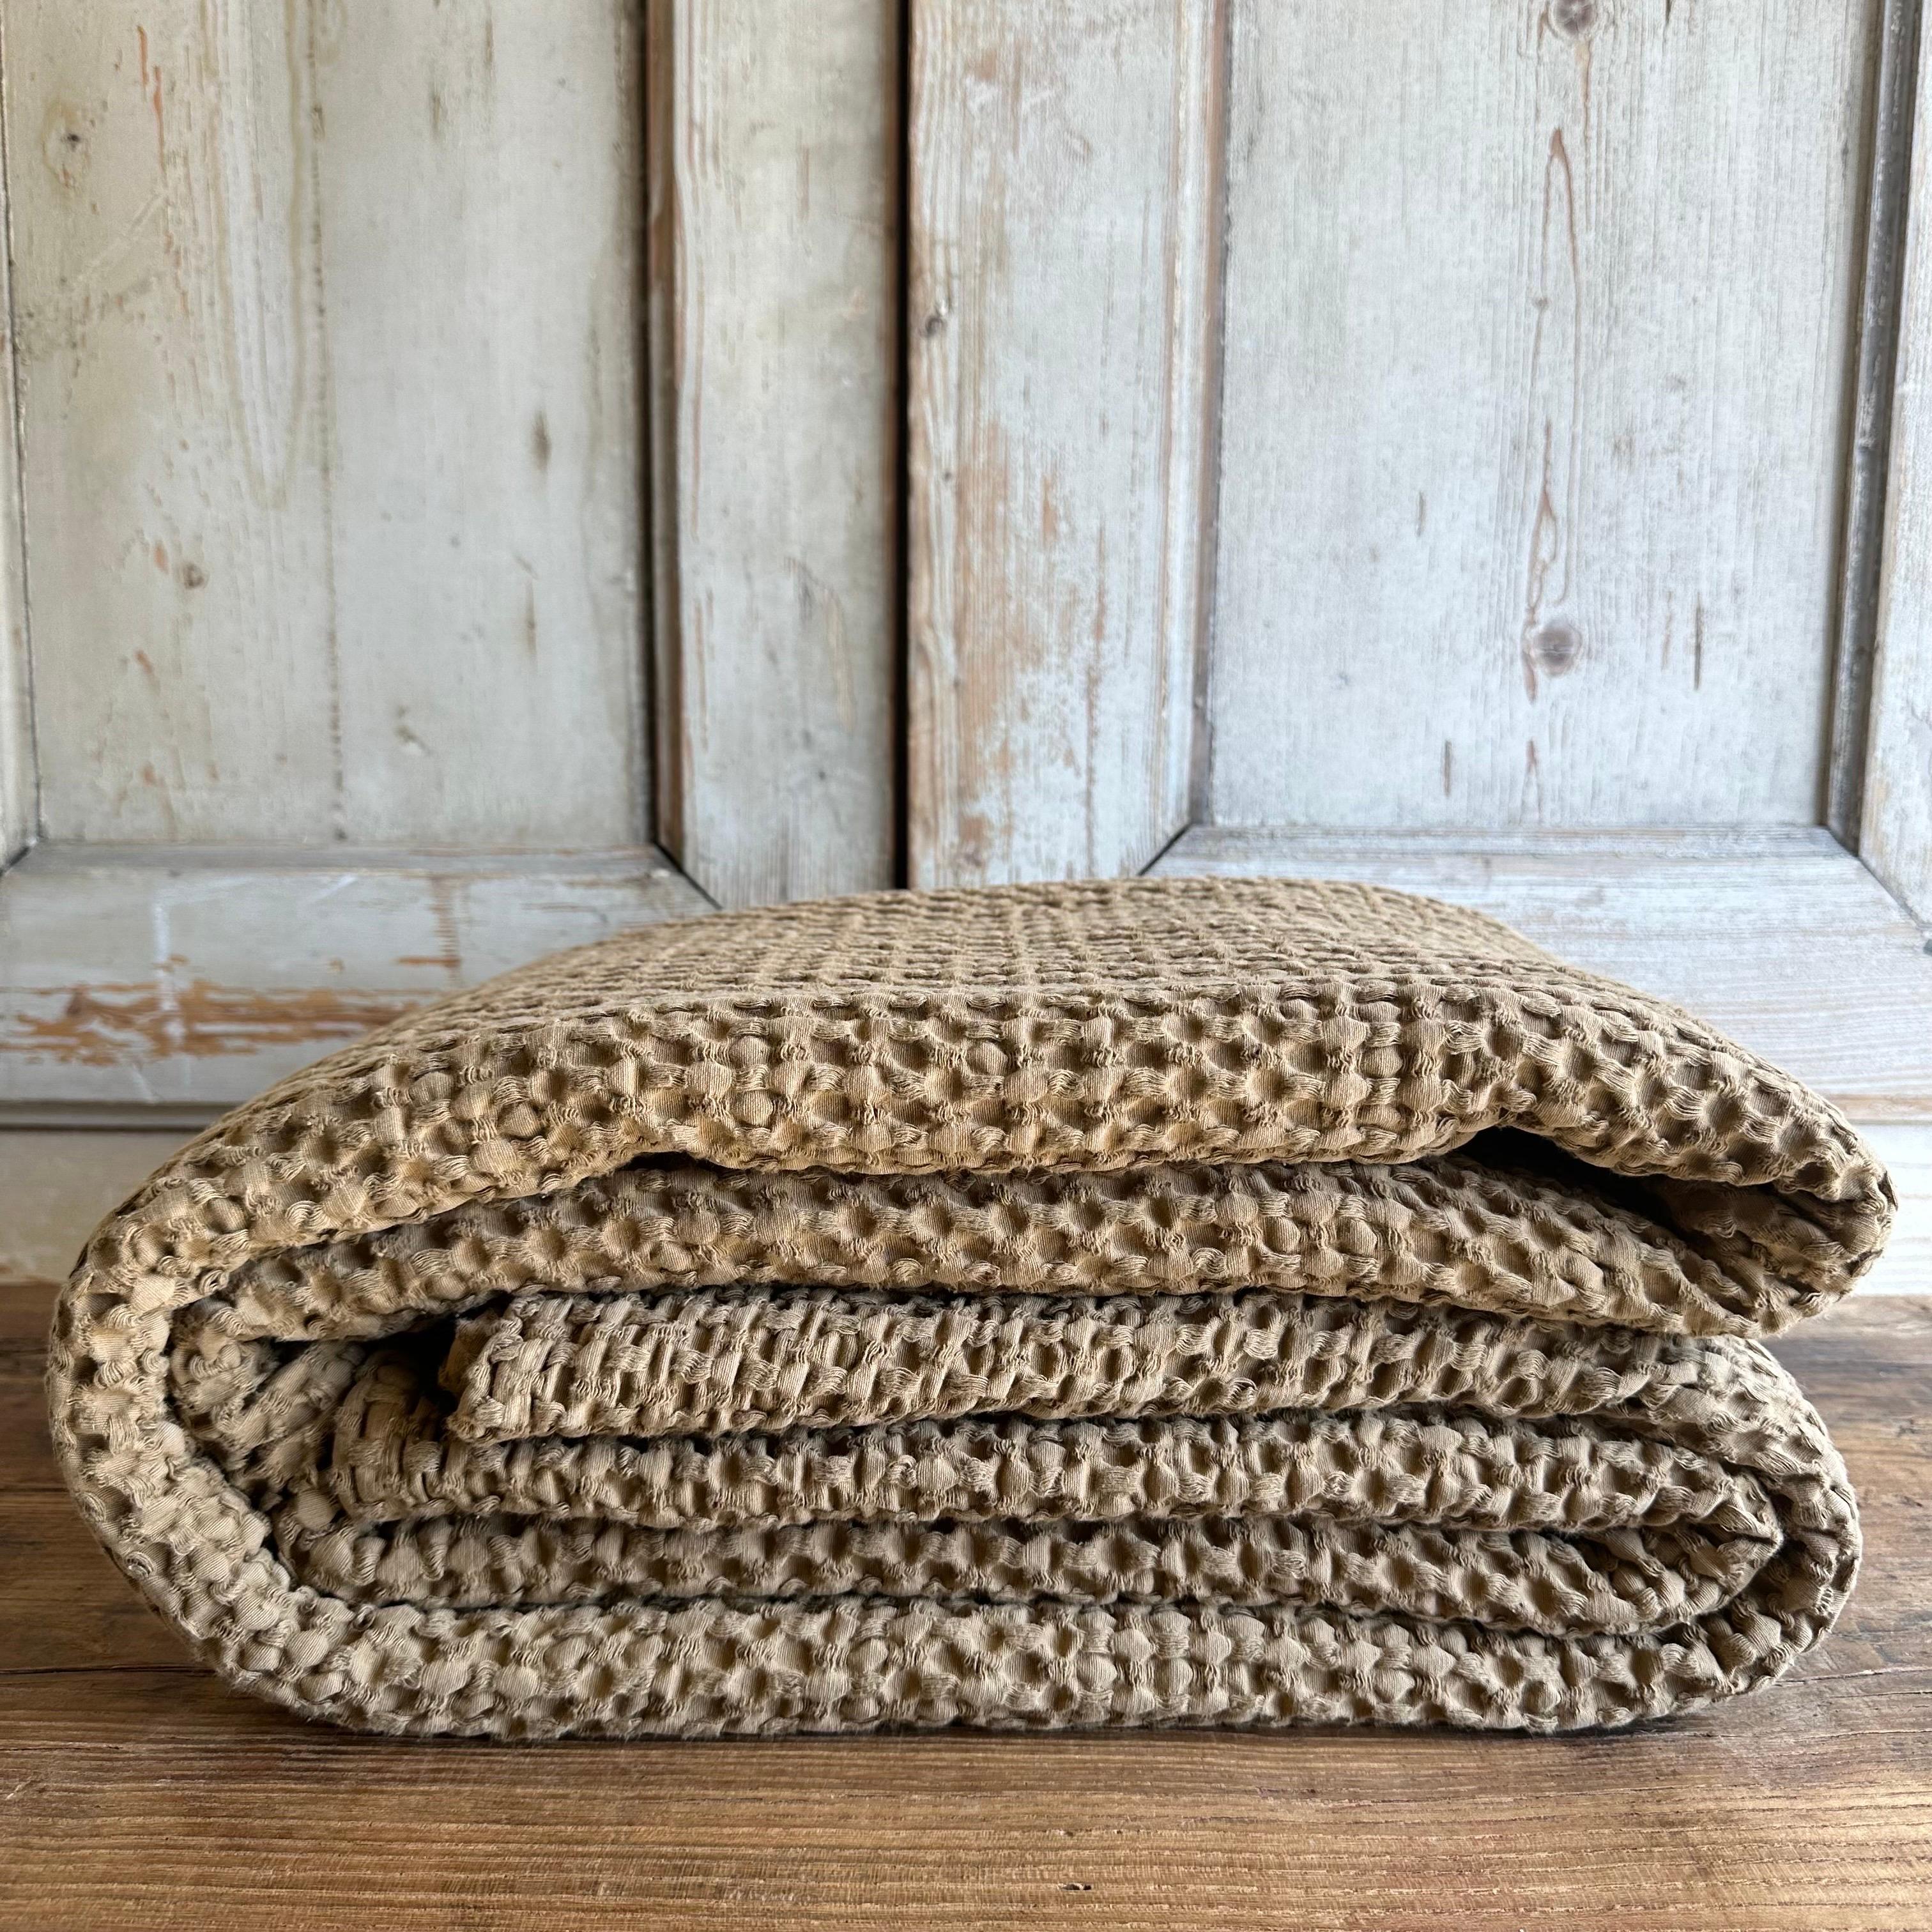 Rennes cotton waffle baffle coverlet blanket.
A soft plush cotton baffle waffle cotton coverlet. Great to use as an accent at the end of the bed, or use as a coverlet.
Color: Tabac / a rusty brown or caramel color
Size : 94 x 102
Large size can